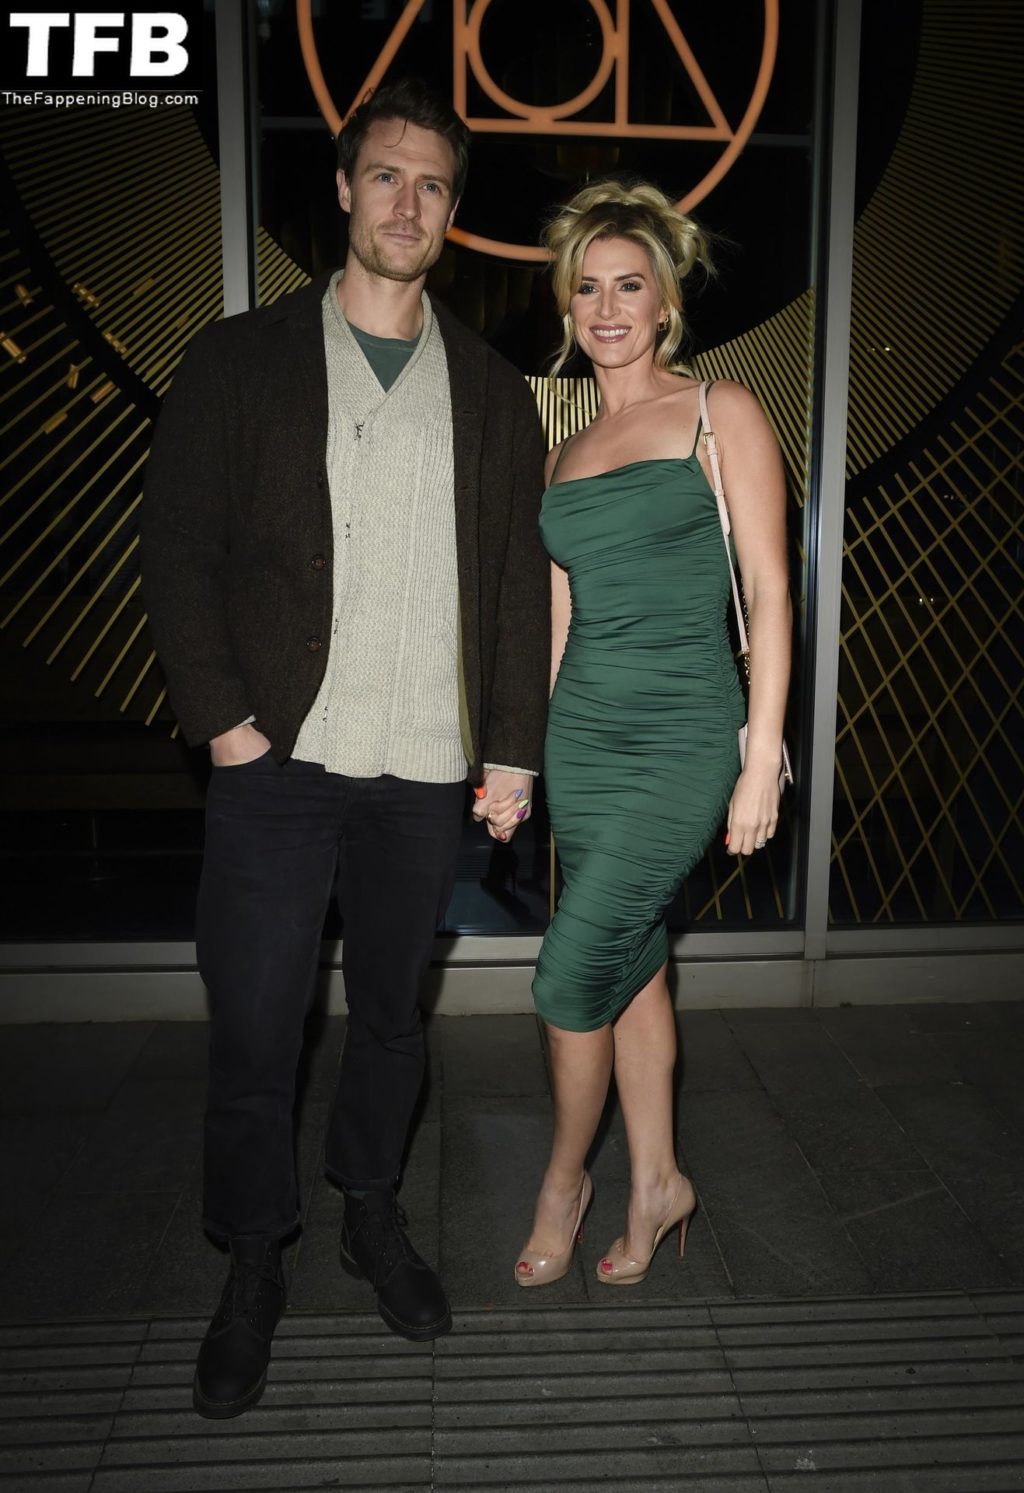 Sarah Jayne Dunn Sexy The Fappening Blog 7 1024x1493 - Sarah Jayne Dunn Looks Hot in a Green Dress Arriving at the Re-Launch of The Alchemist in Spinningfields (26 Photos)